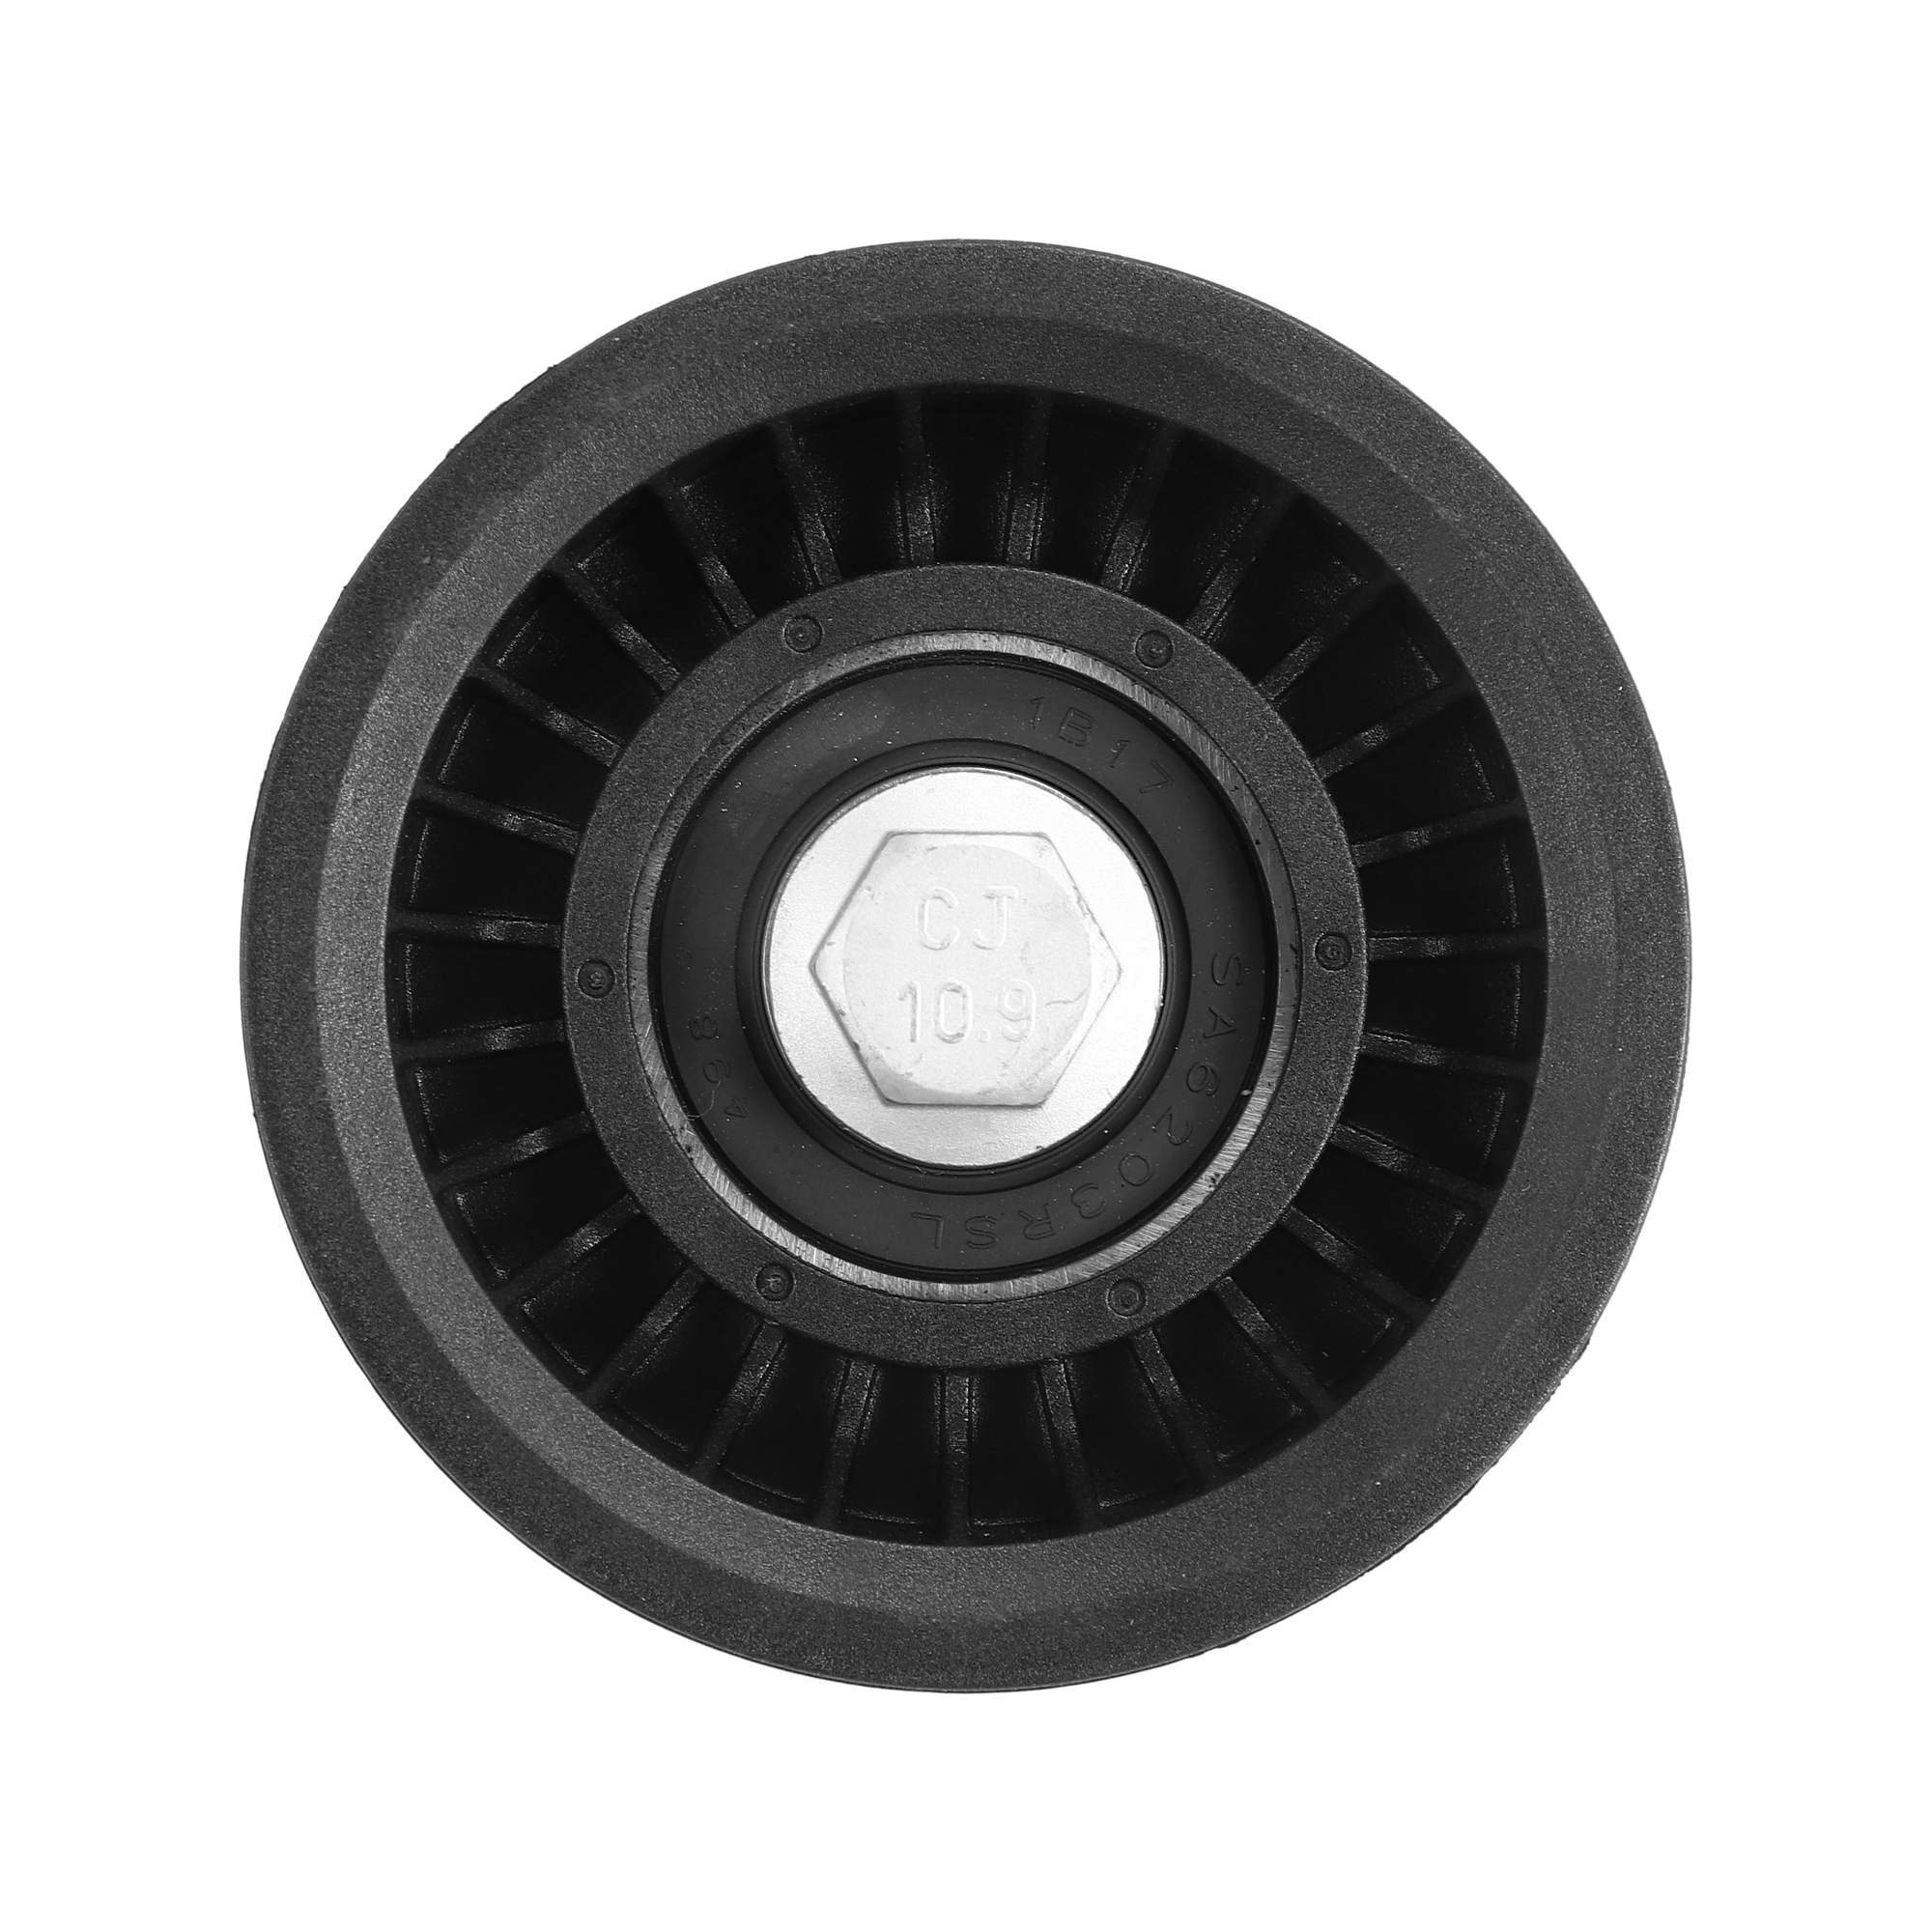 Unique Bargains LR035545 Engine Drive Belt Idler Pulley for Land Rover Range Rover Discovery